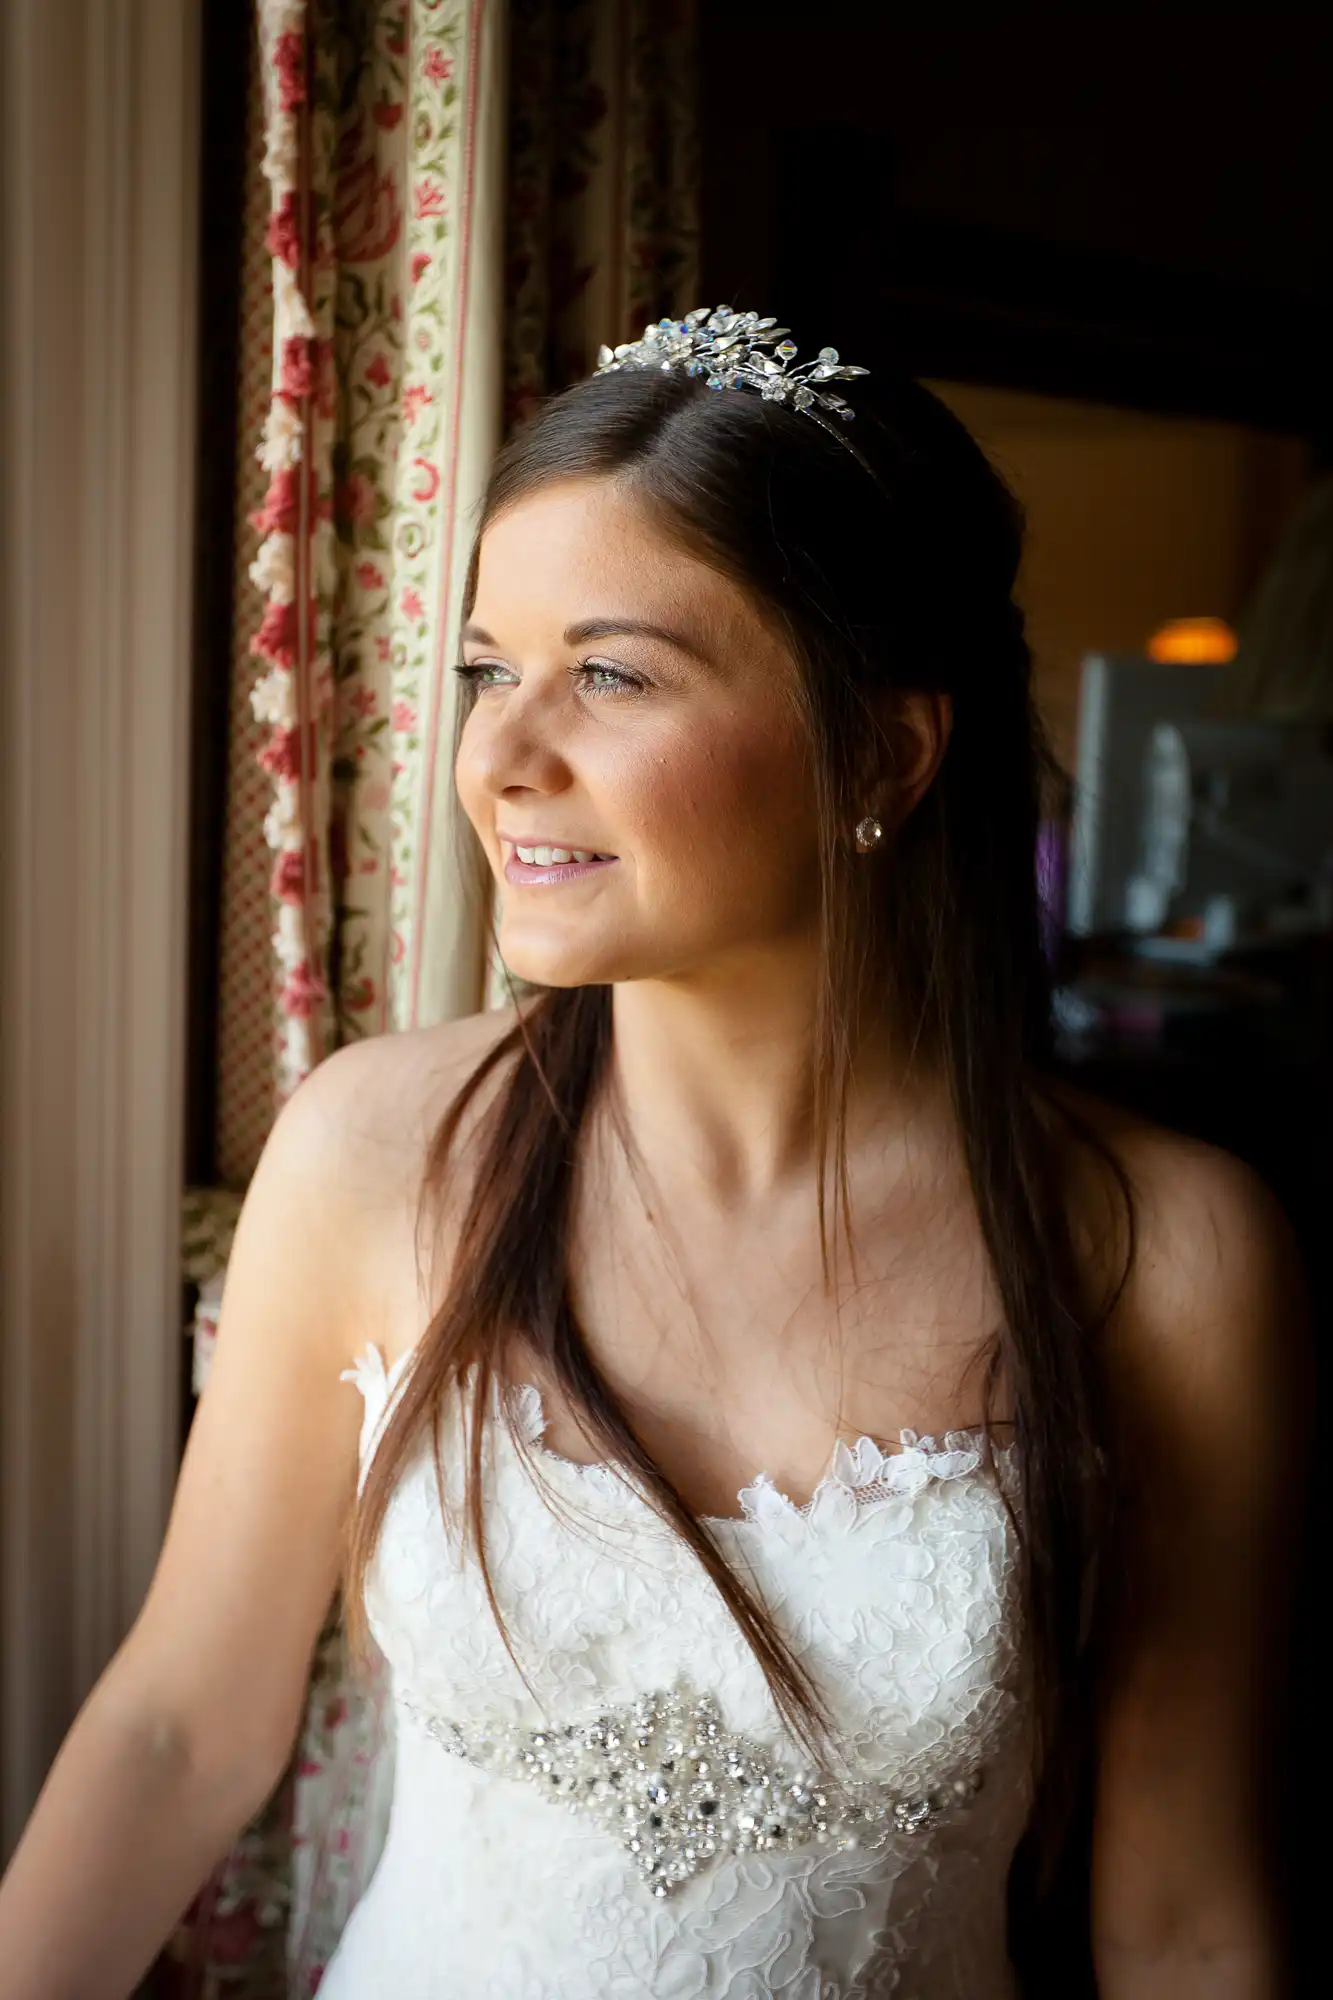 A bride in a detailed white gown and a bejeweled headpiece smiles softly, looking out a window.